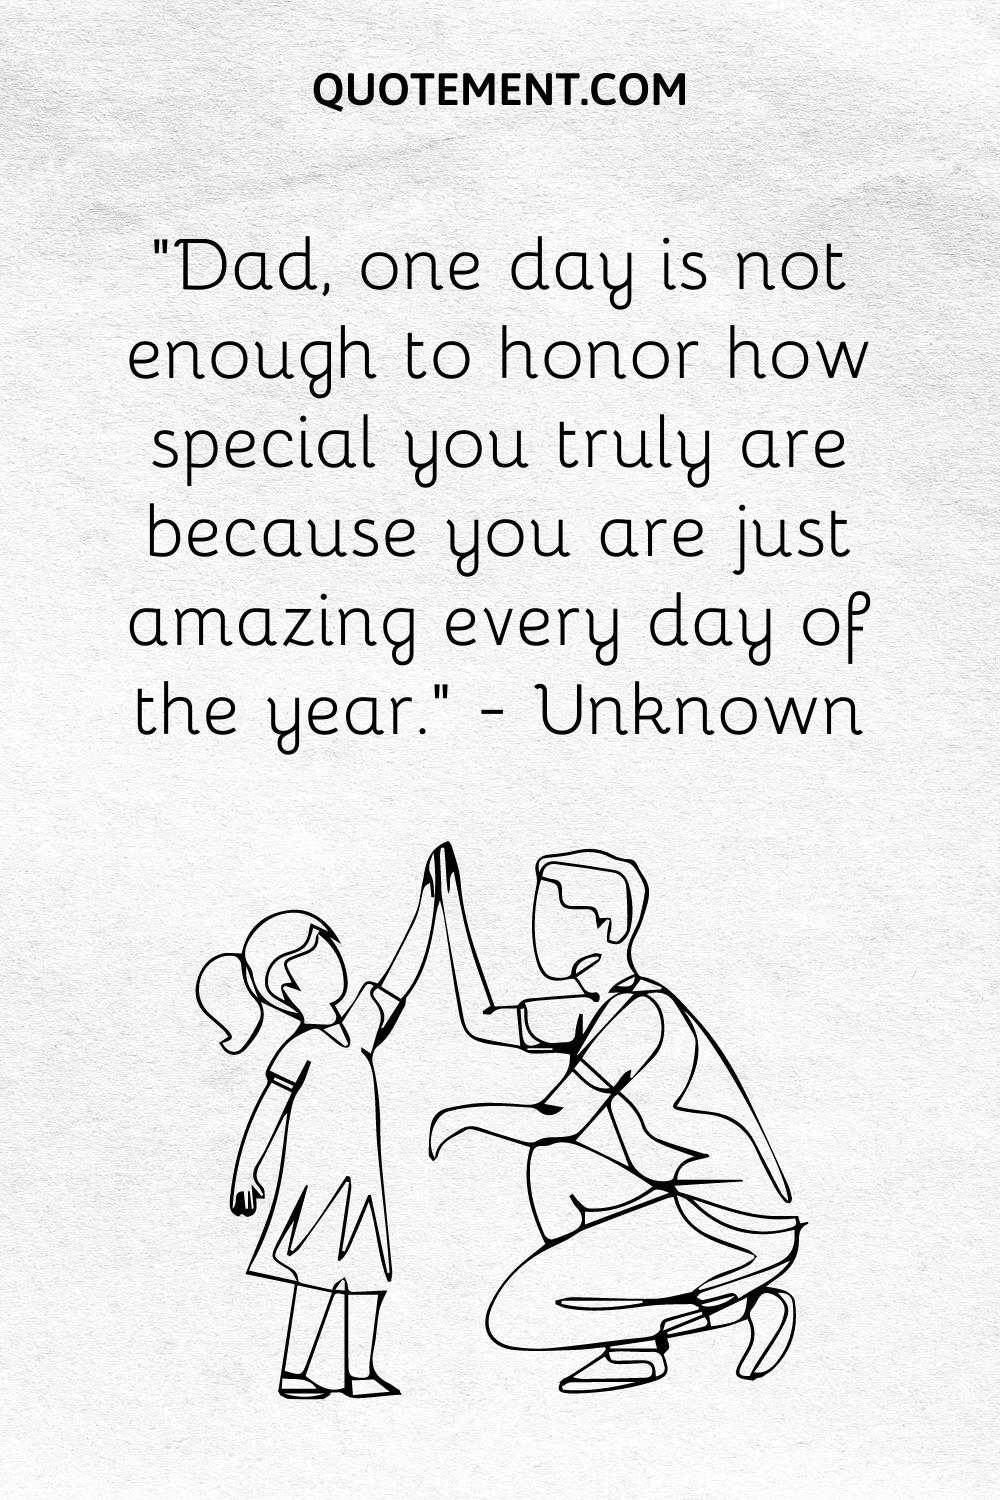 “Dad, one day is not enough to honor how special you truly are because you are just amazing every day of the year.” — Unknown